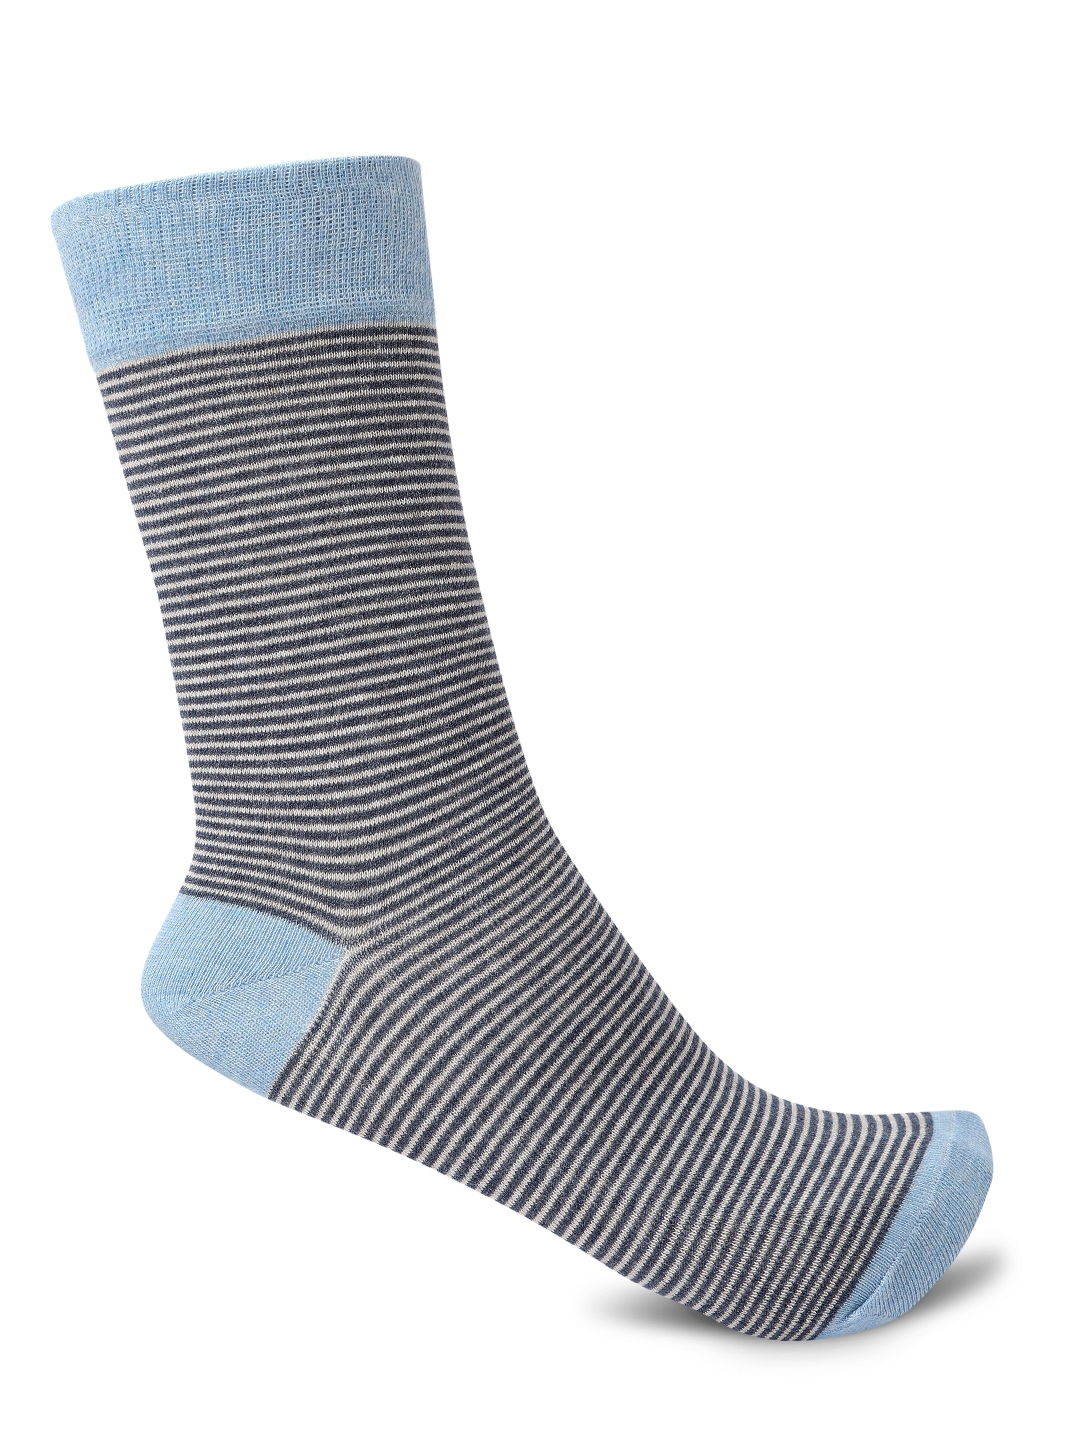 Smarty Pants | Smarty Pants men's pack of 5 solid and printed cotton socks.  3